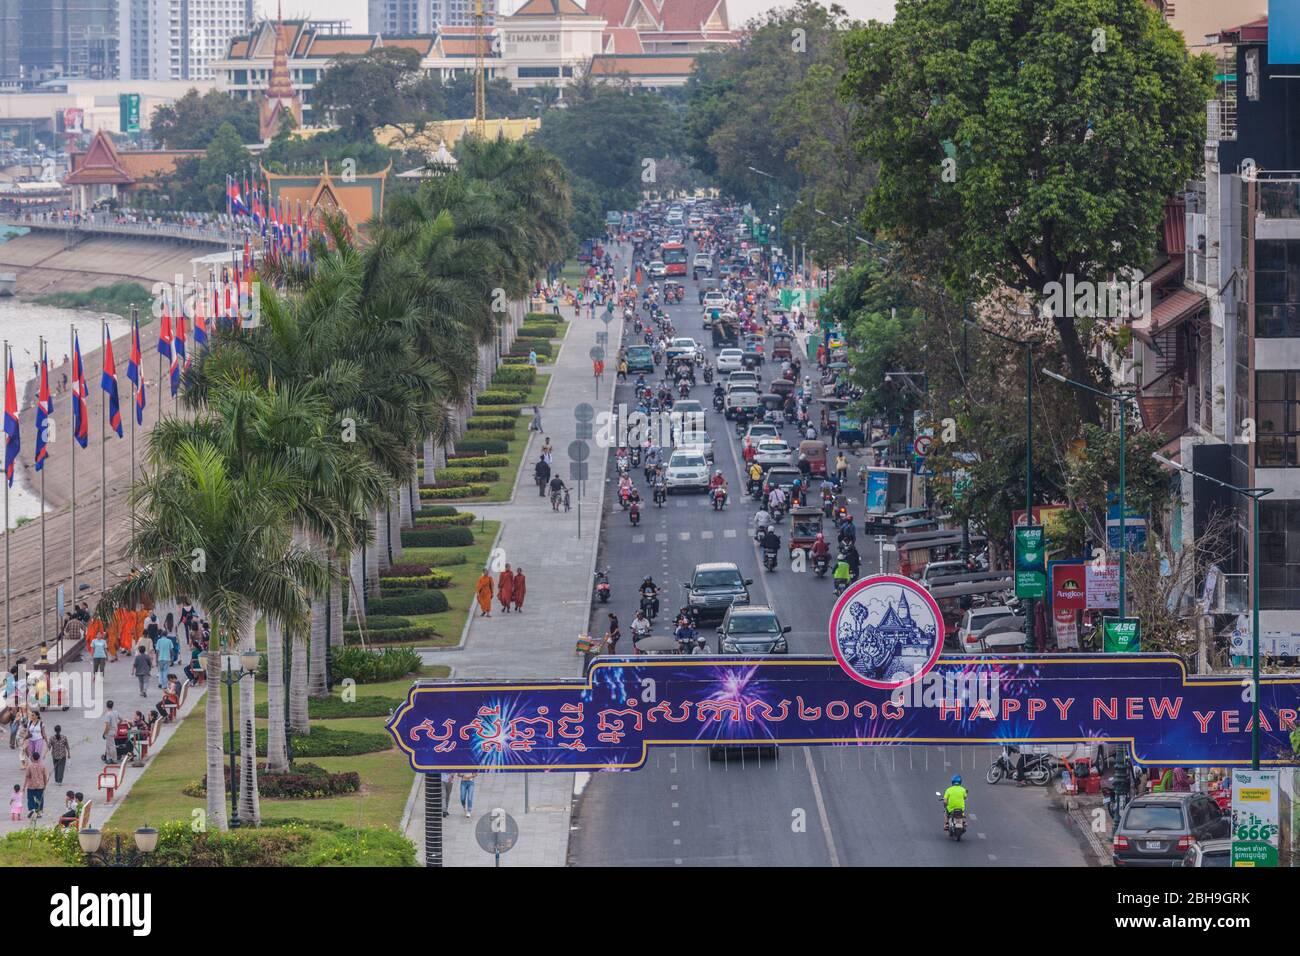 Cambodge, Phnom Penh, Sisowath Quay le trafic, elevated view Banque D'Images